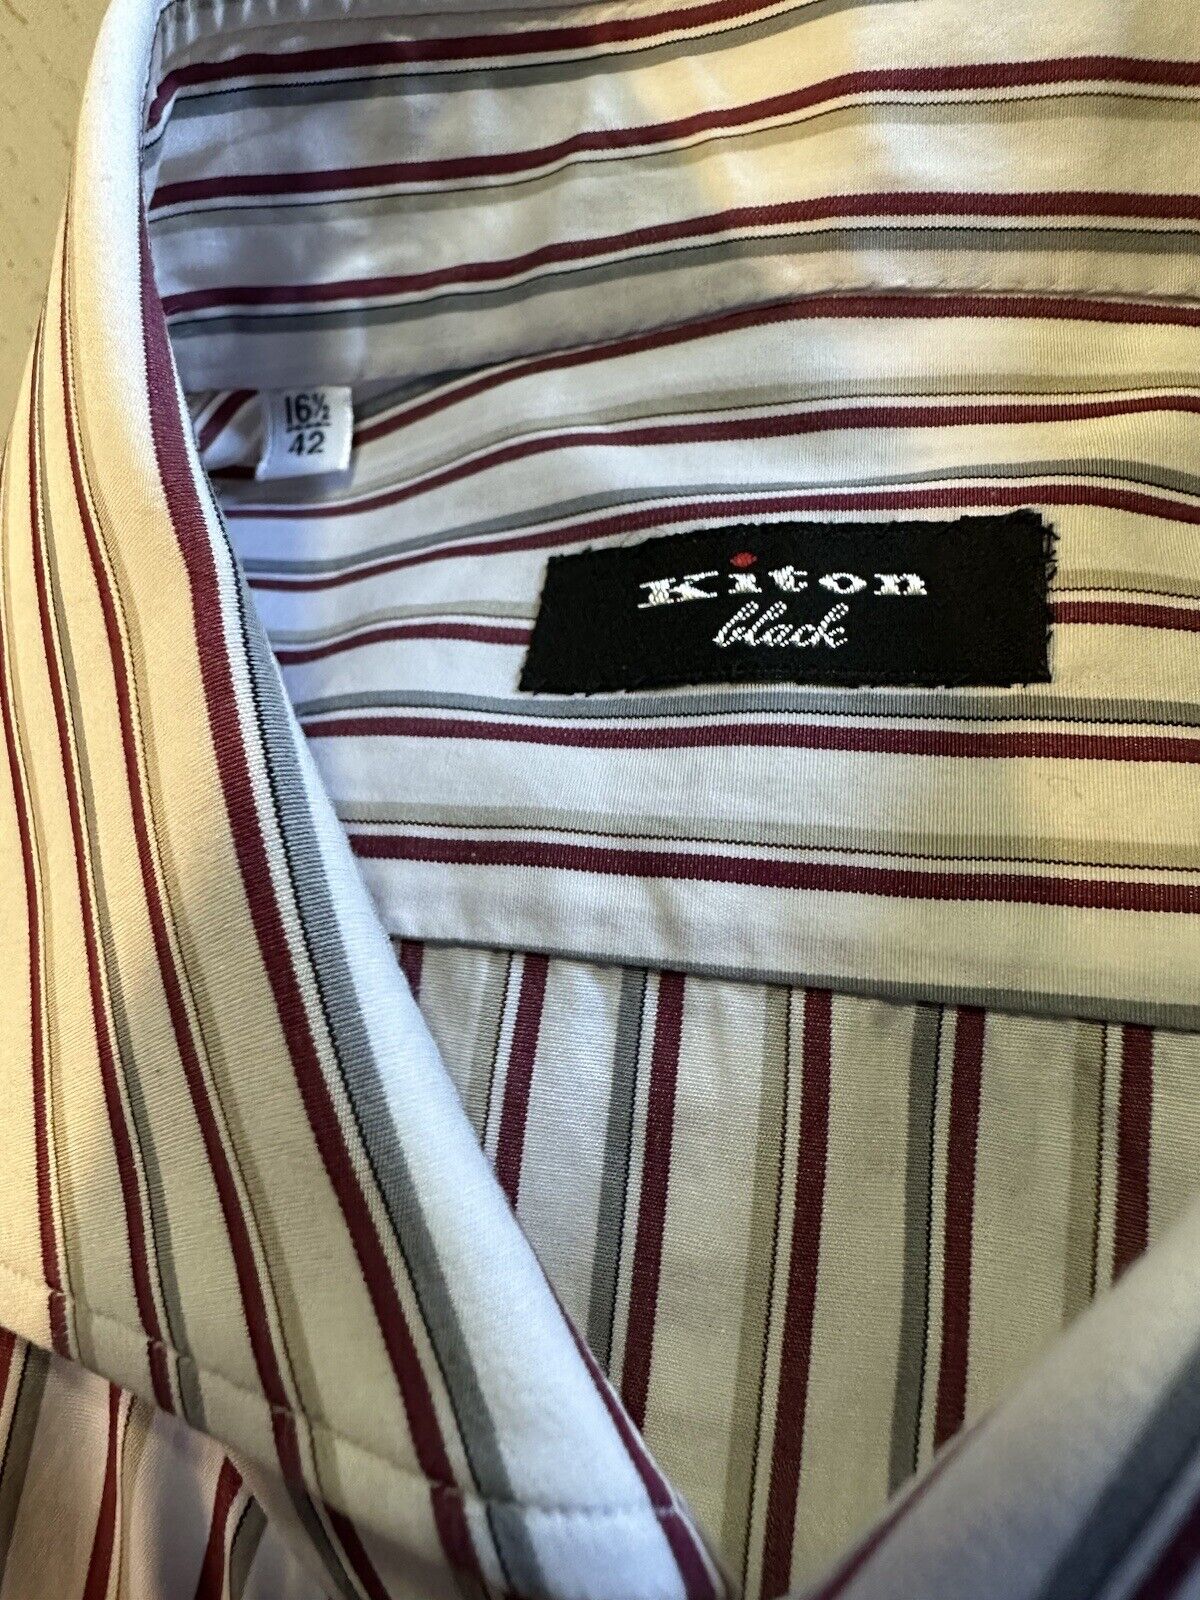 $1195 Kiton Classic Dress Shirt White/Red Stripped Size 42/16.5  Italy